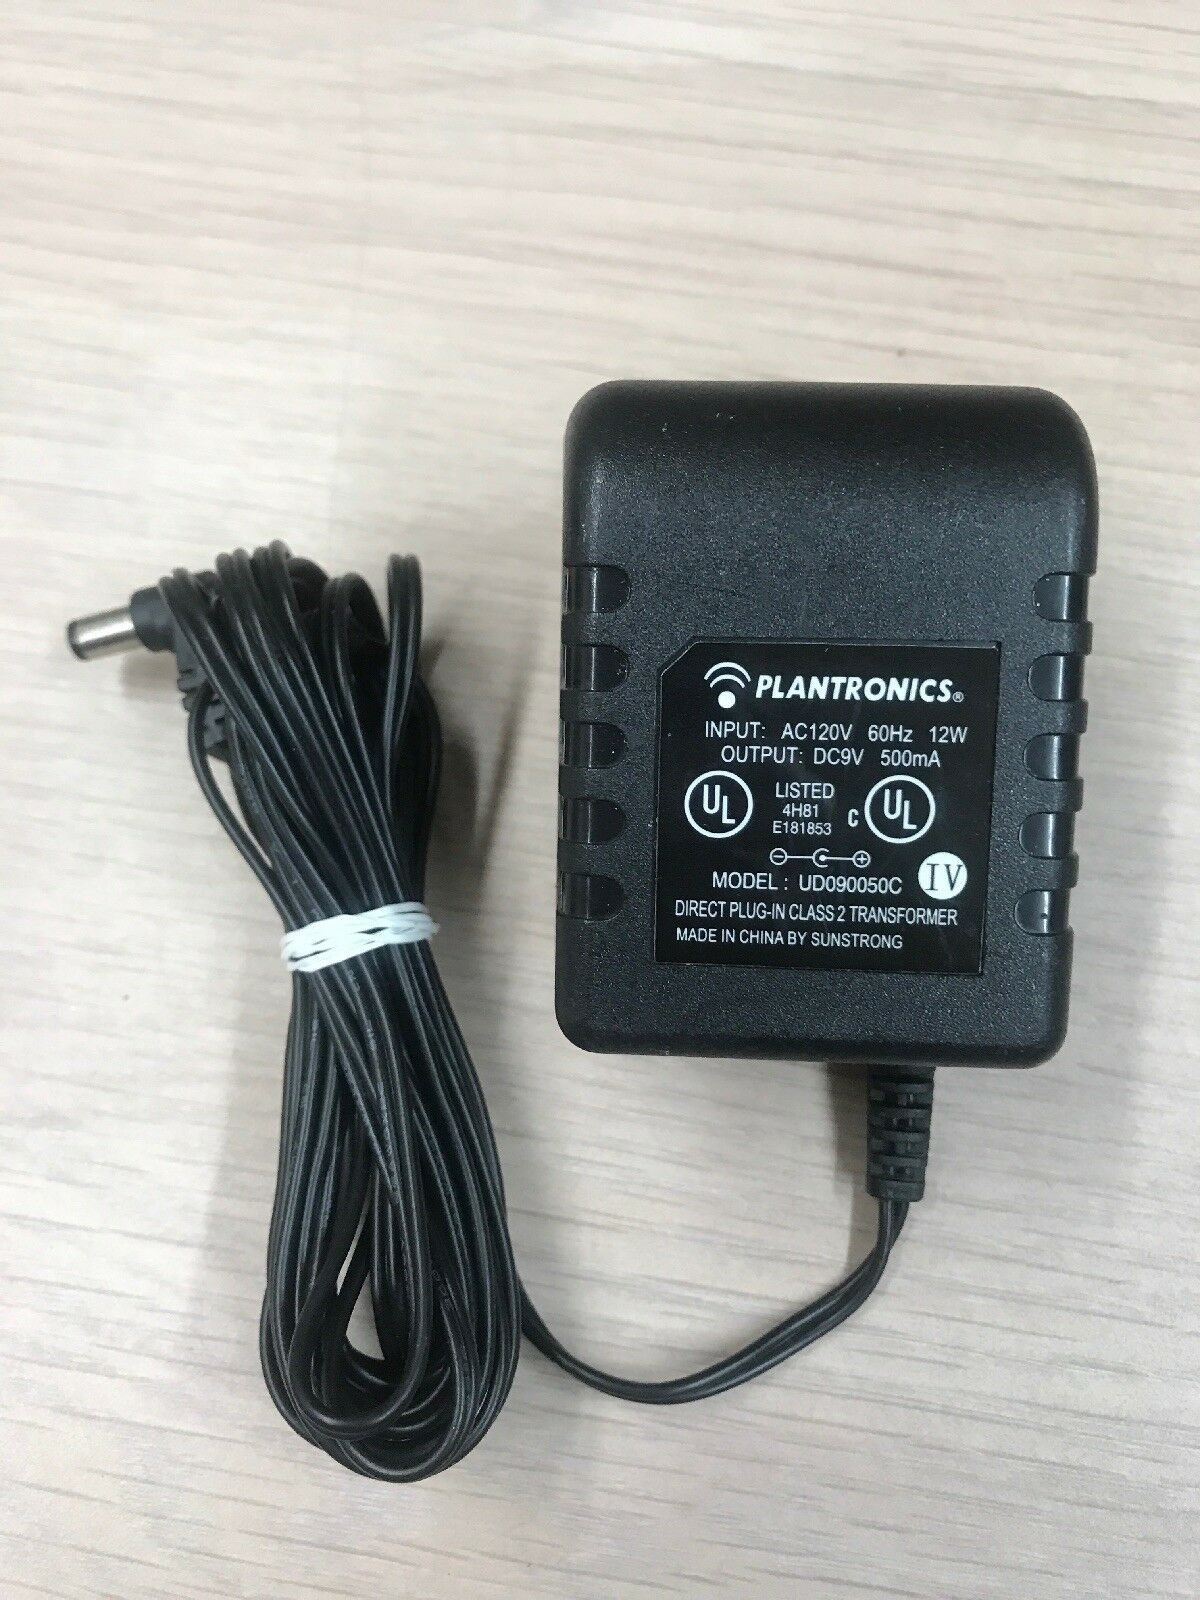 *Brand NEW* 9VDC 500mA 12W AC Adapter UD090050C Plantronics Power Charger